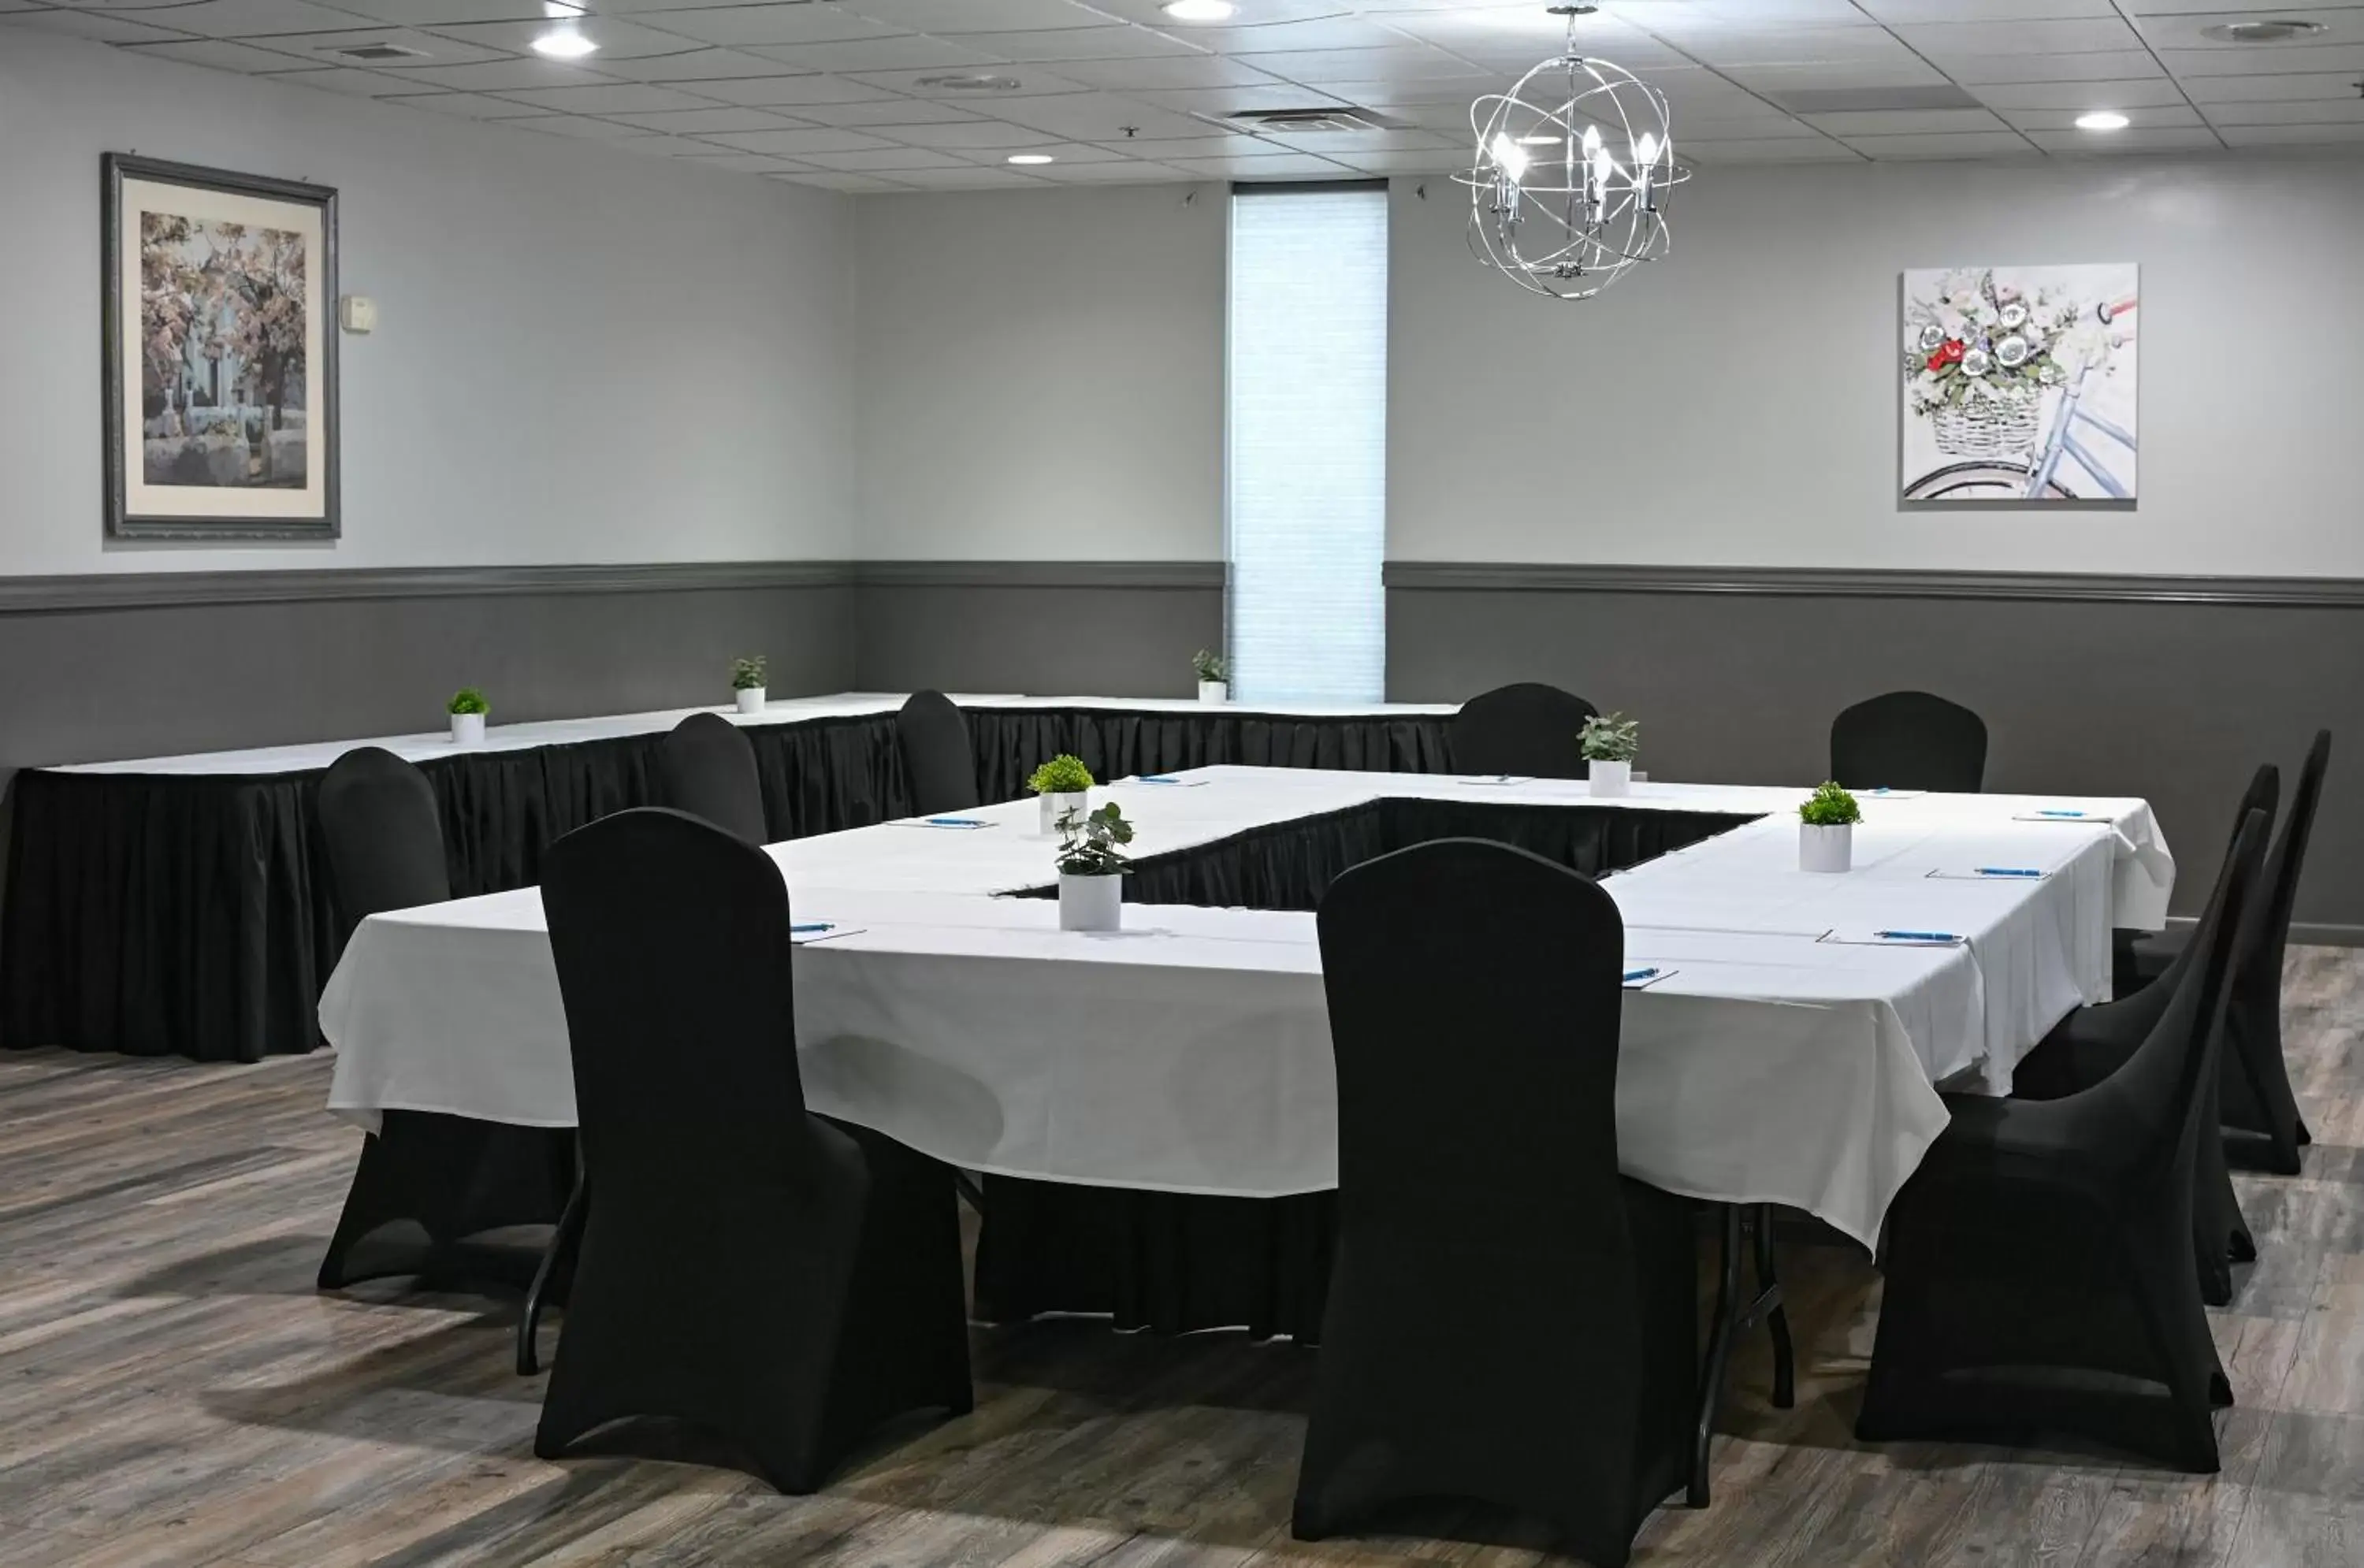 Meeting/conference room in Harbor Shores on Lake Geneva